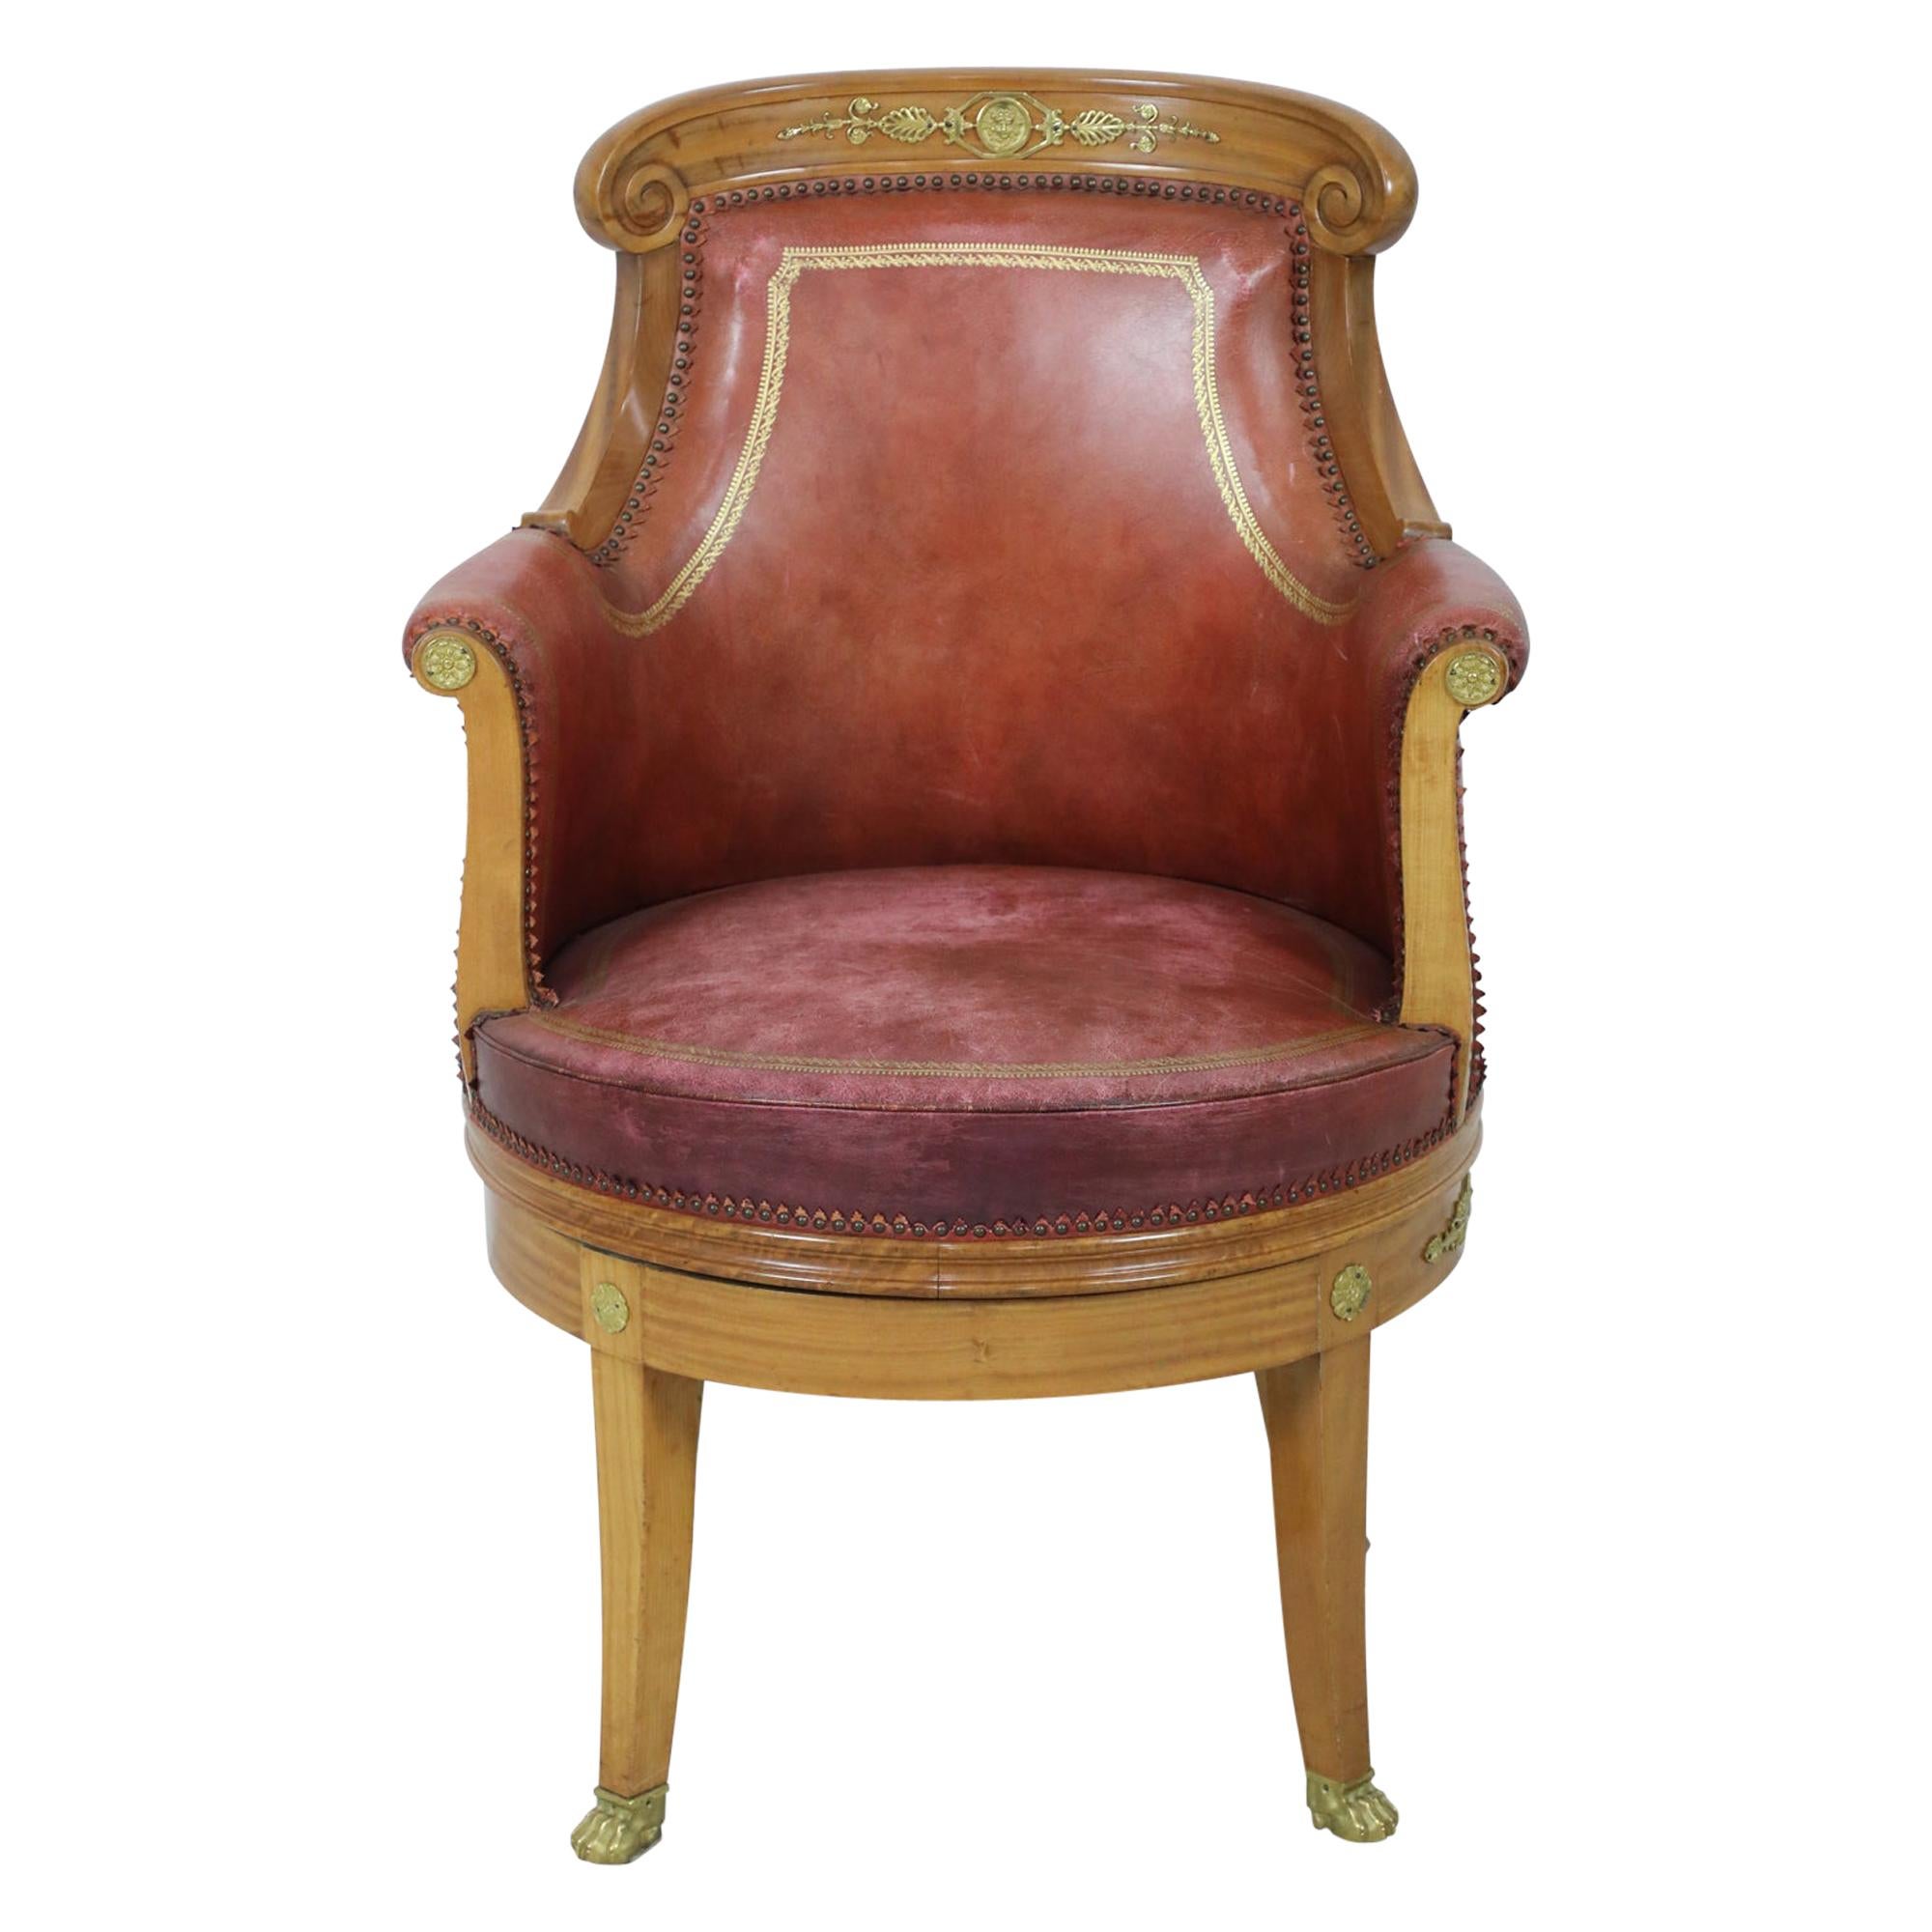 French Empire Blond Mahogany Swivel Leather Chair with Bronze Trim